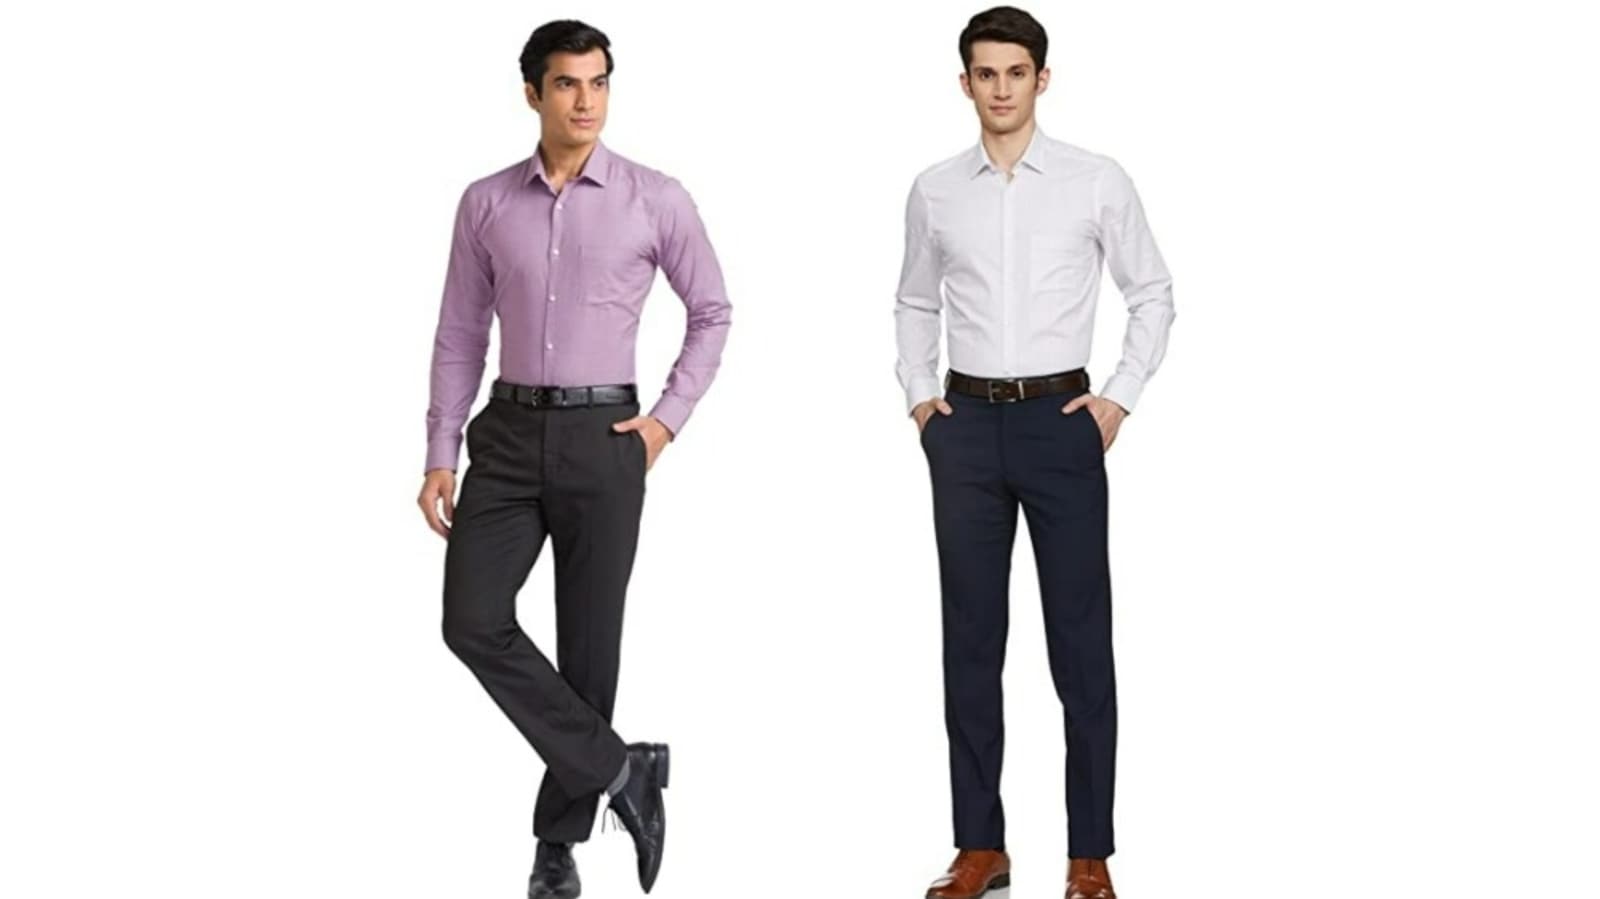 Park Avenue formal pants for men rank high on style and comfort